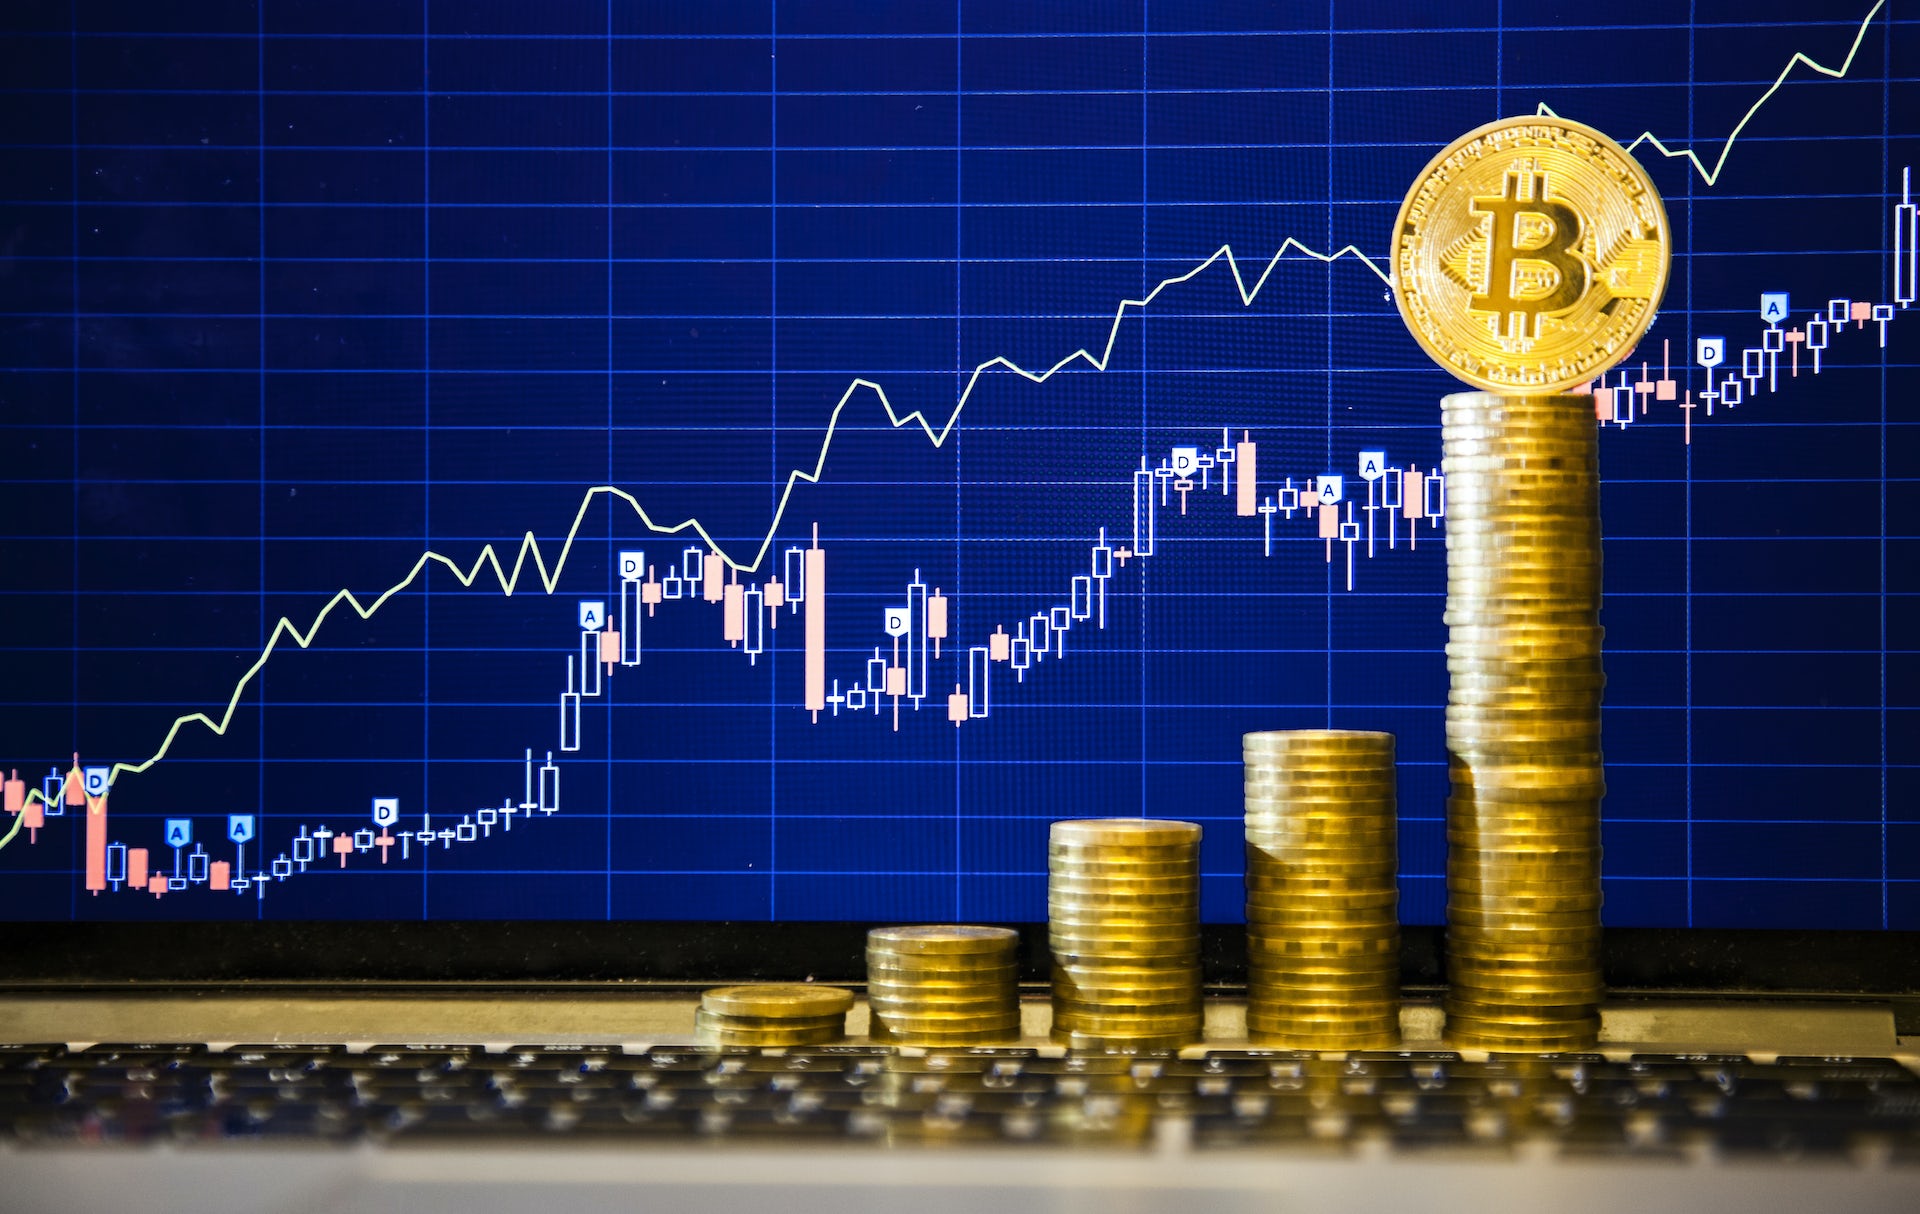 Why is Bitcoin's price at an all-time high? And how is its value determined?